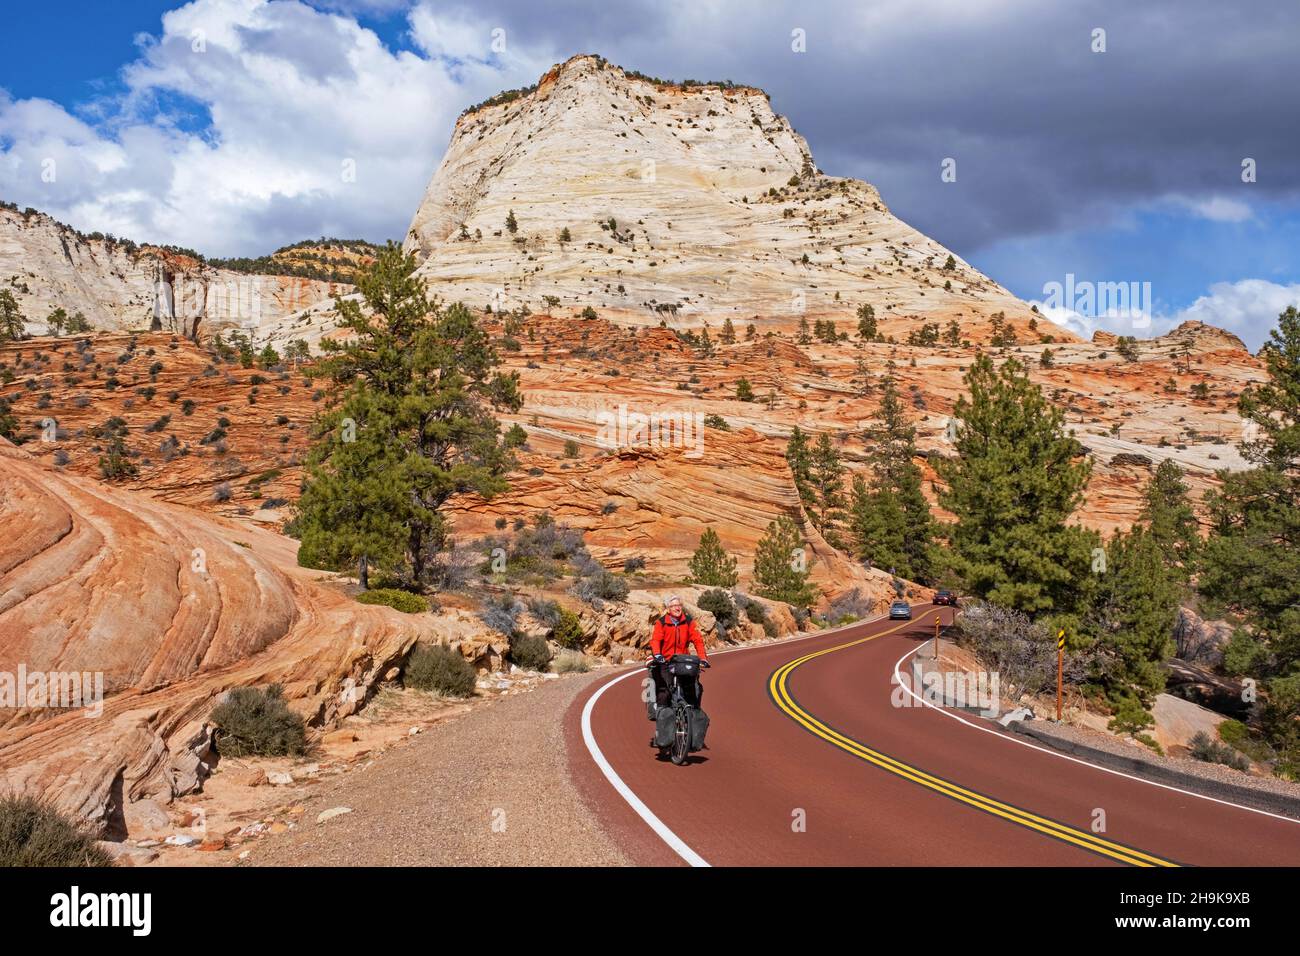 Solitary touring cyclist cycling on road through the red sandstone mountains of Zion National Park, Utah, United States, USA Stock Photo